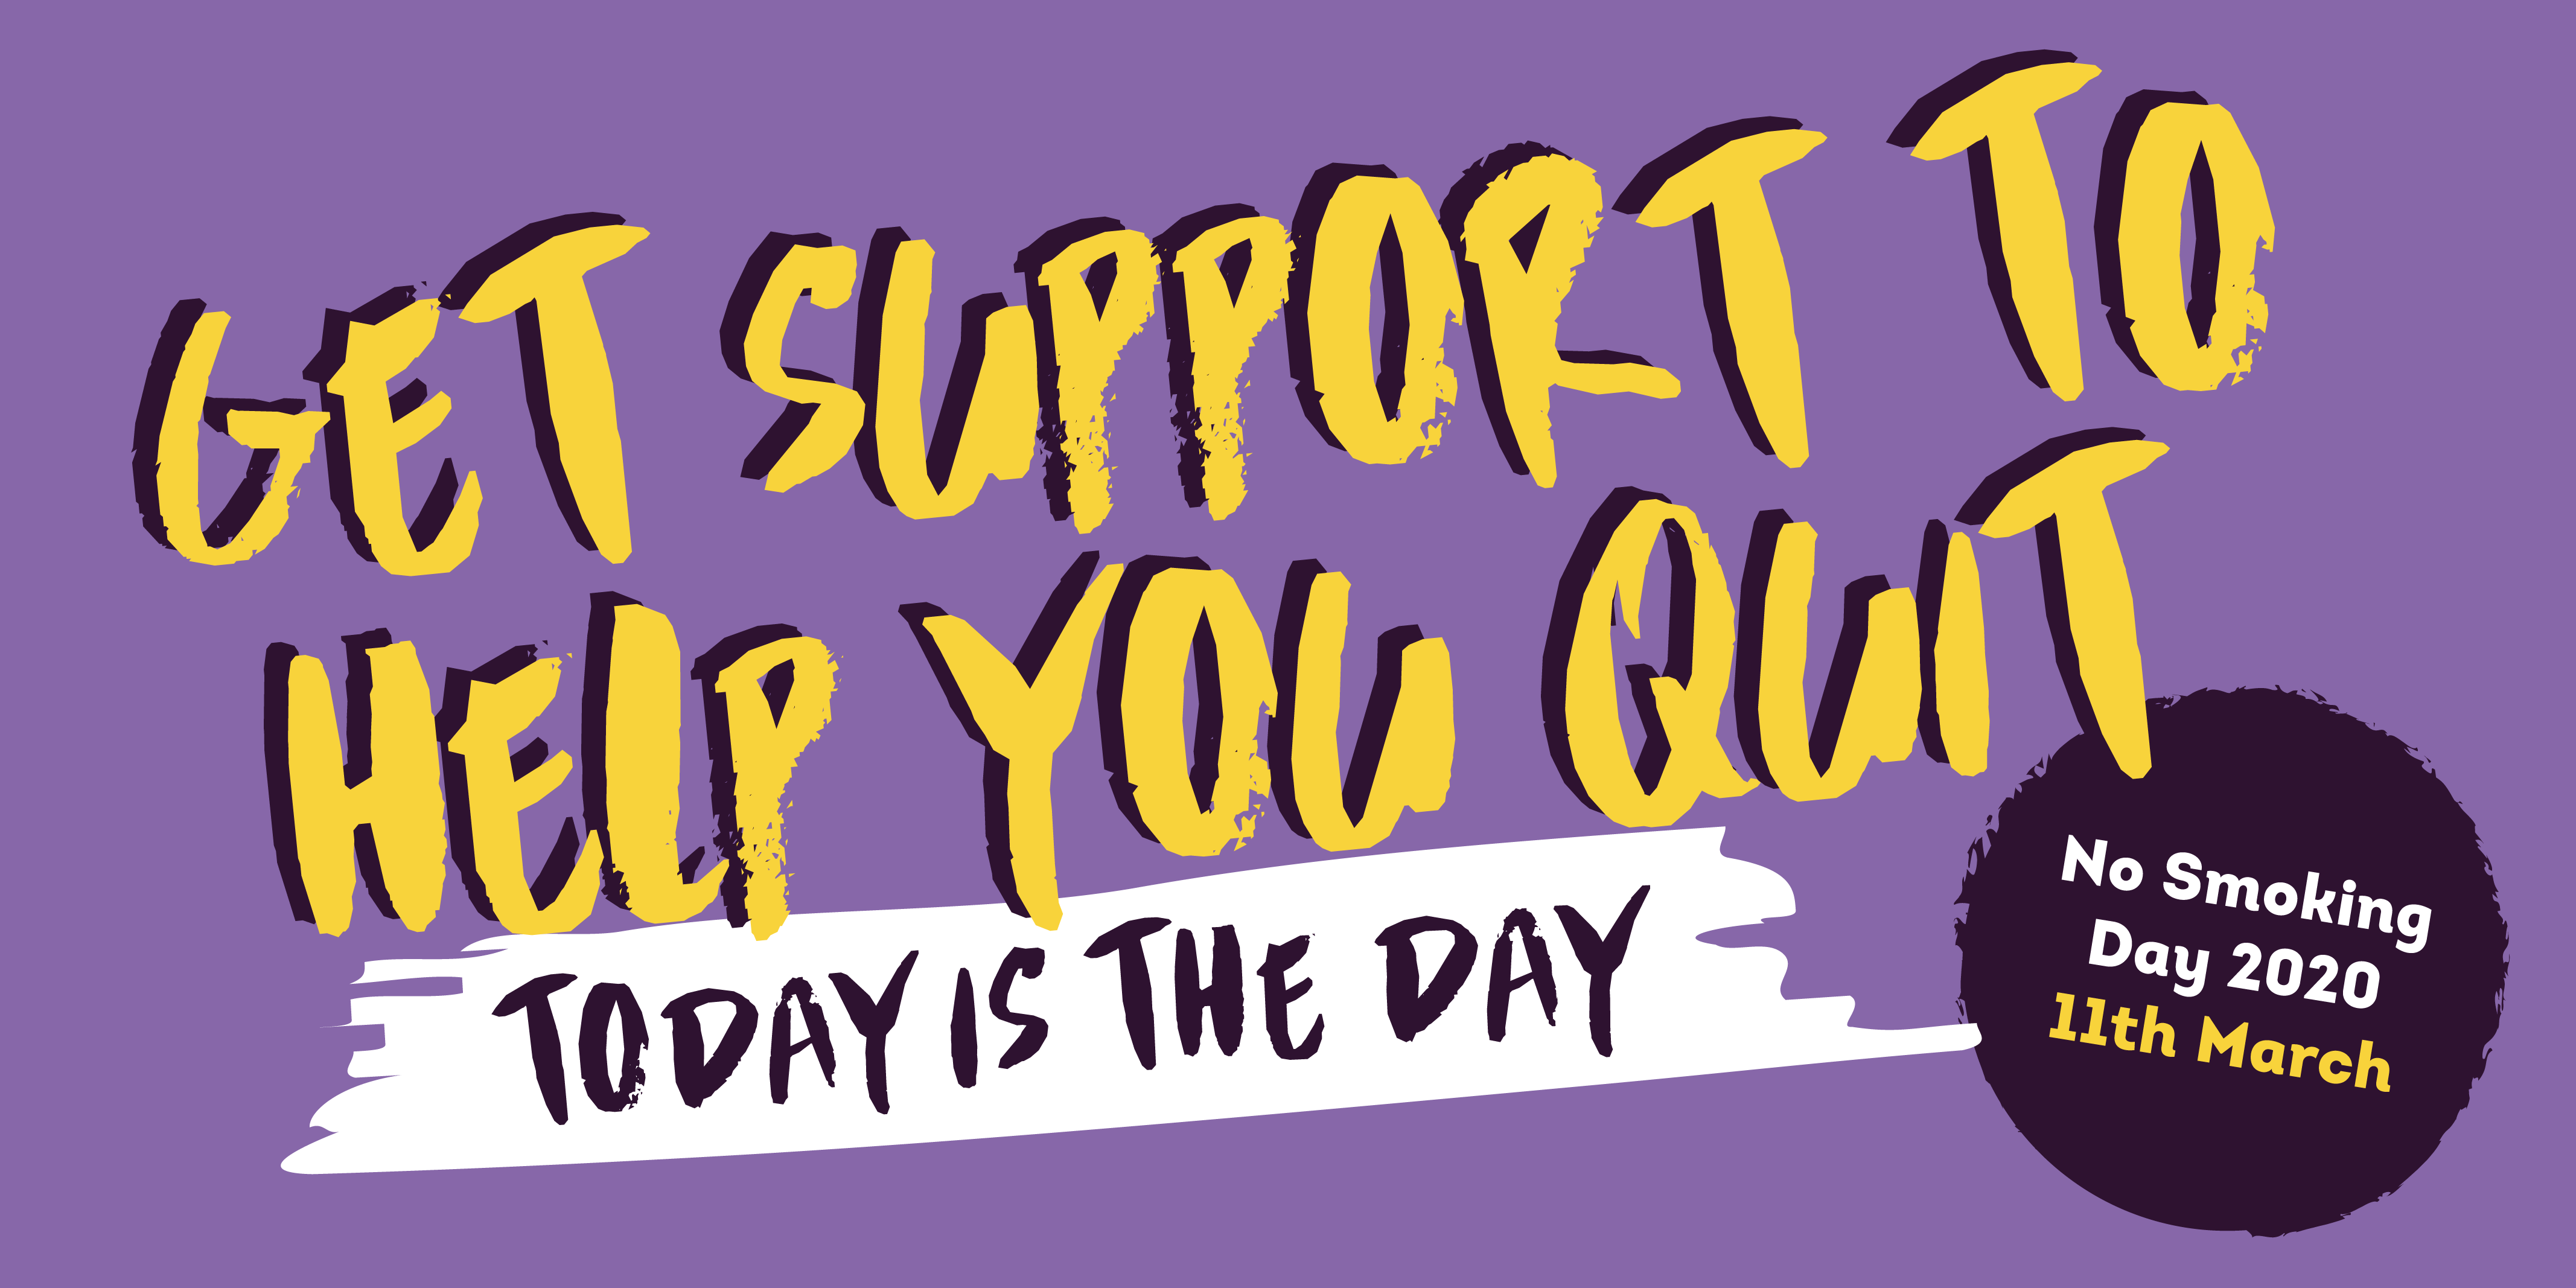 Get support to help you quit. Today is the day. No smoking day 2020 11th March